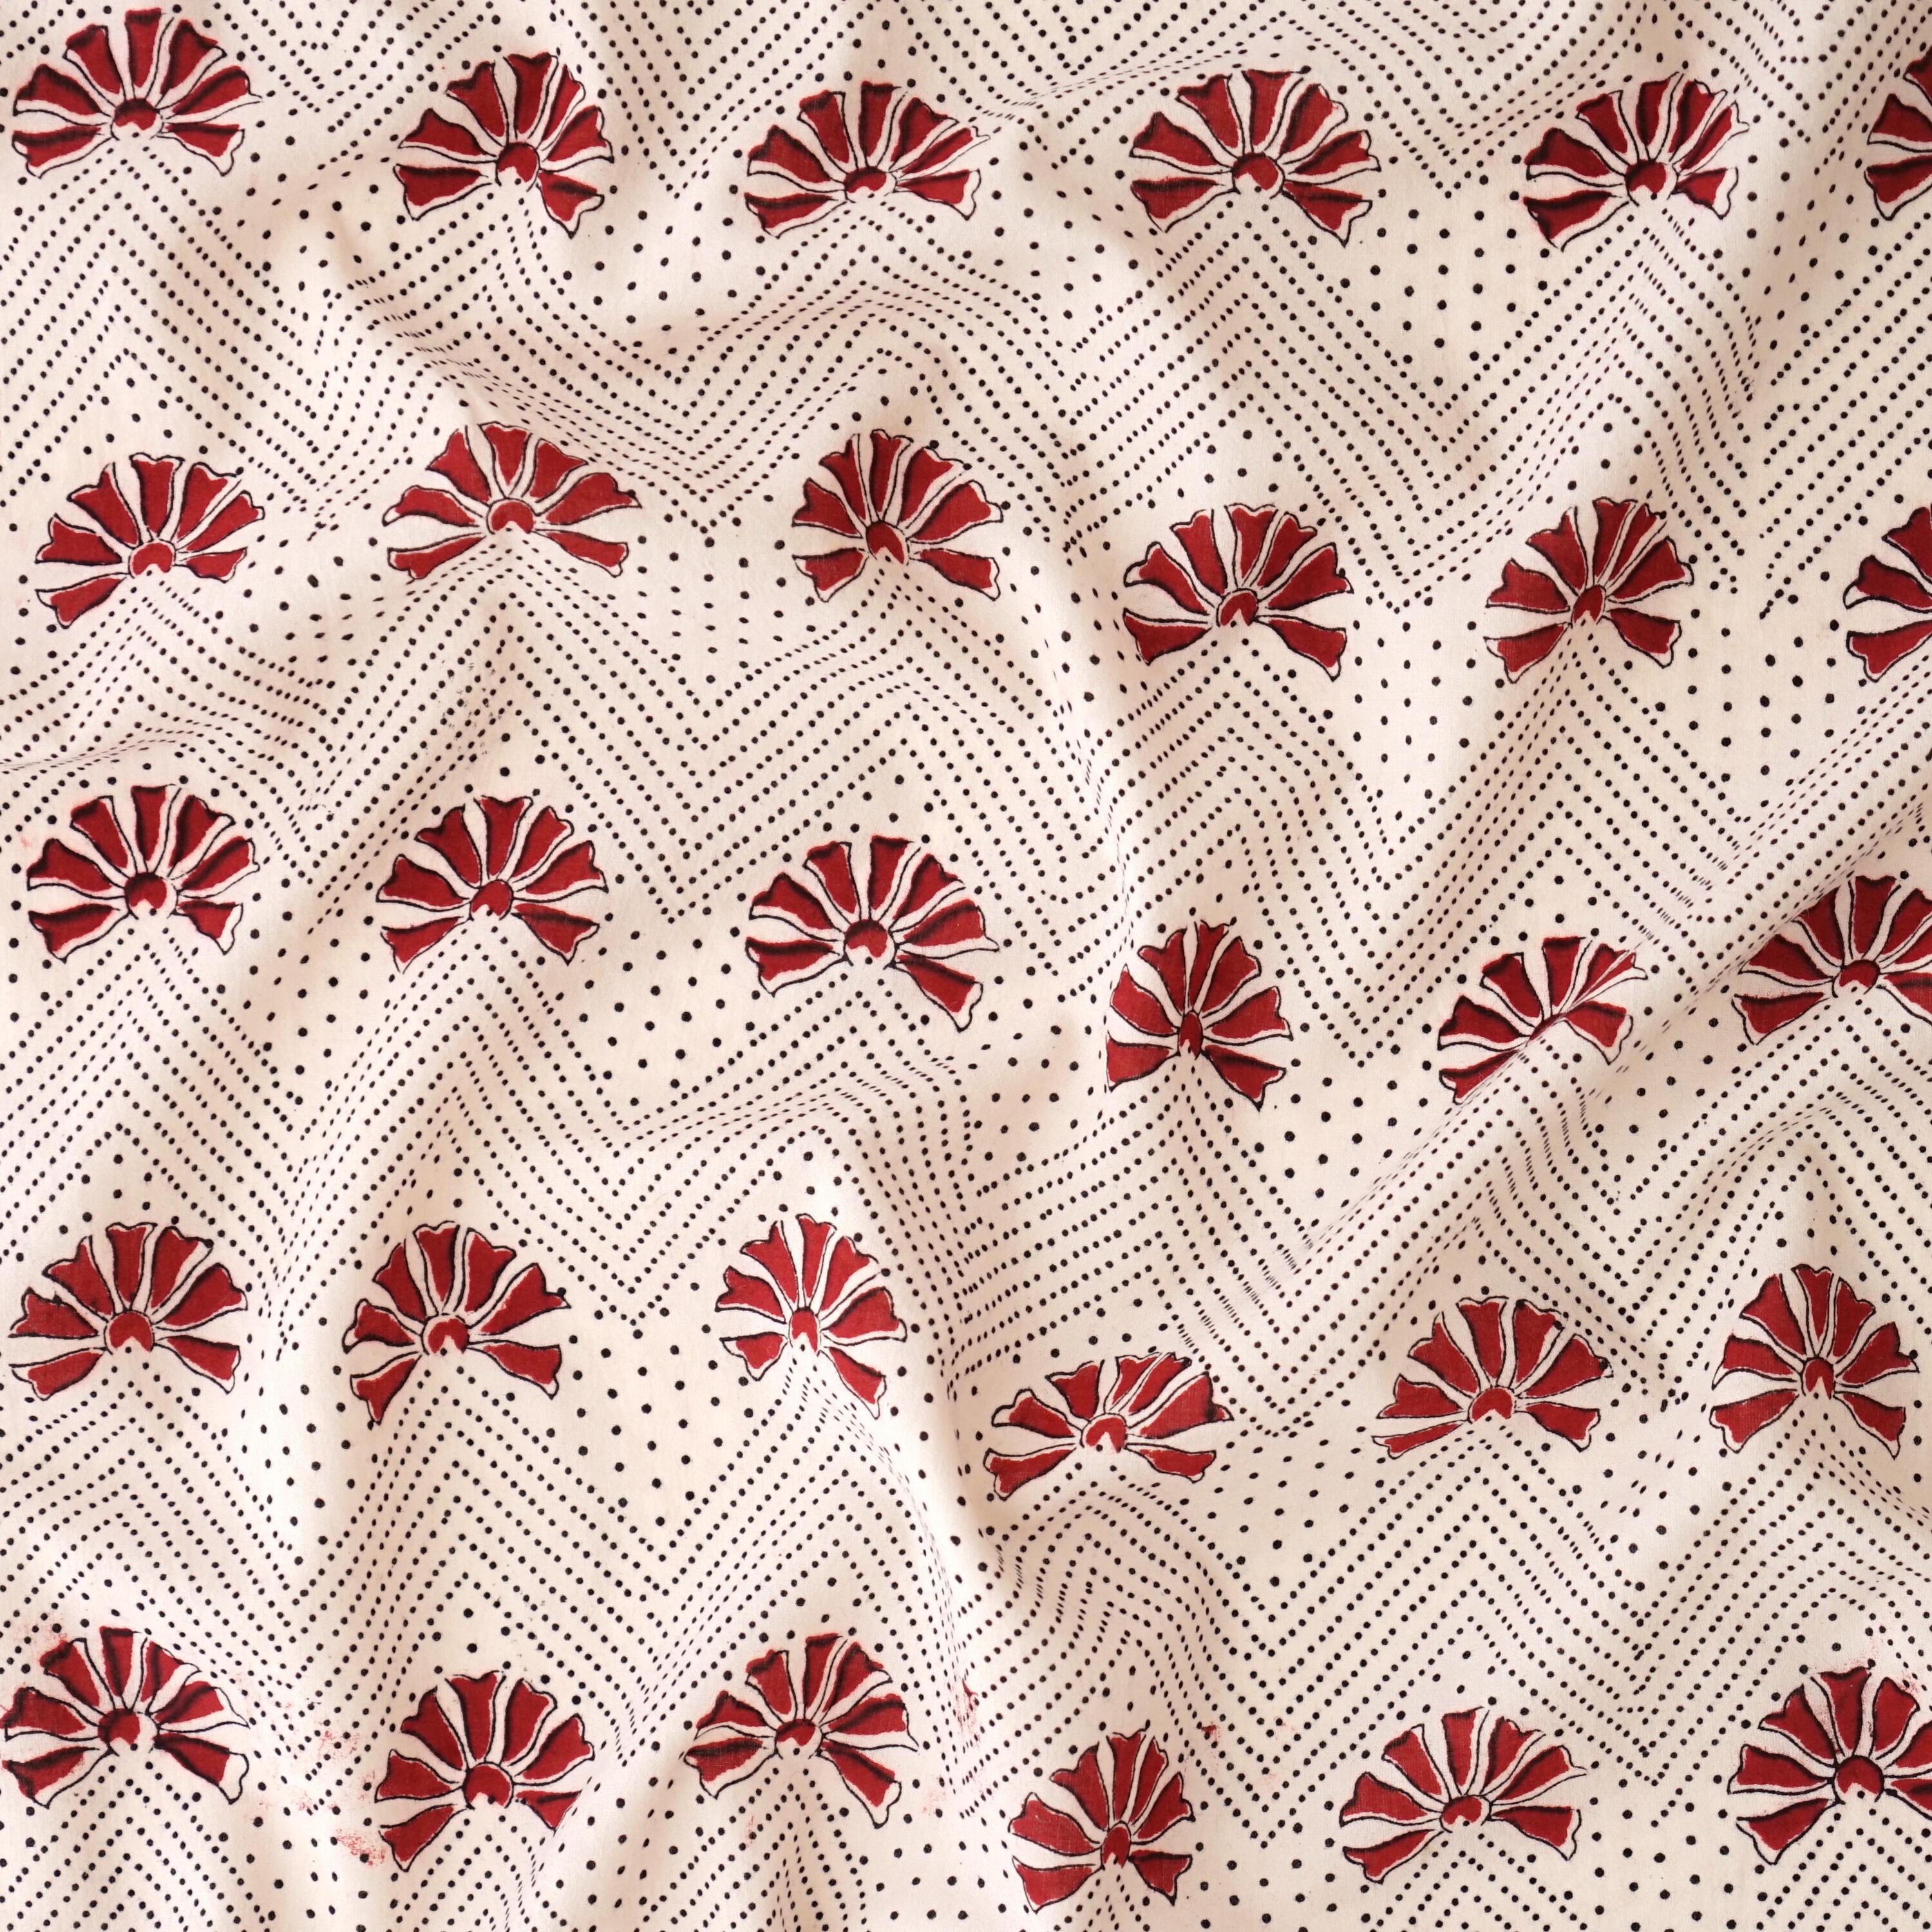 100% Block-Printed Cotton Fabric From Bagh, India - Escape to the Beach - Iron Rust Black & Alizarin Red Dyes - Contrast